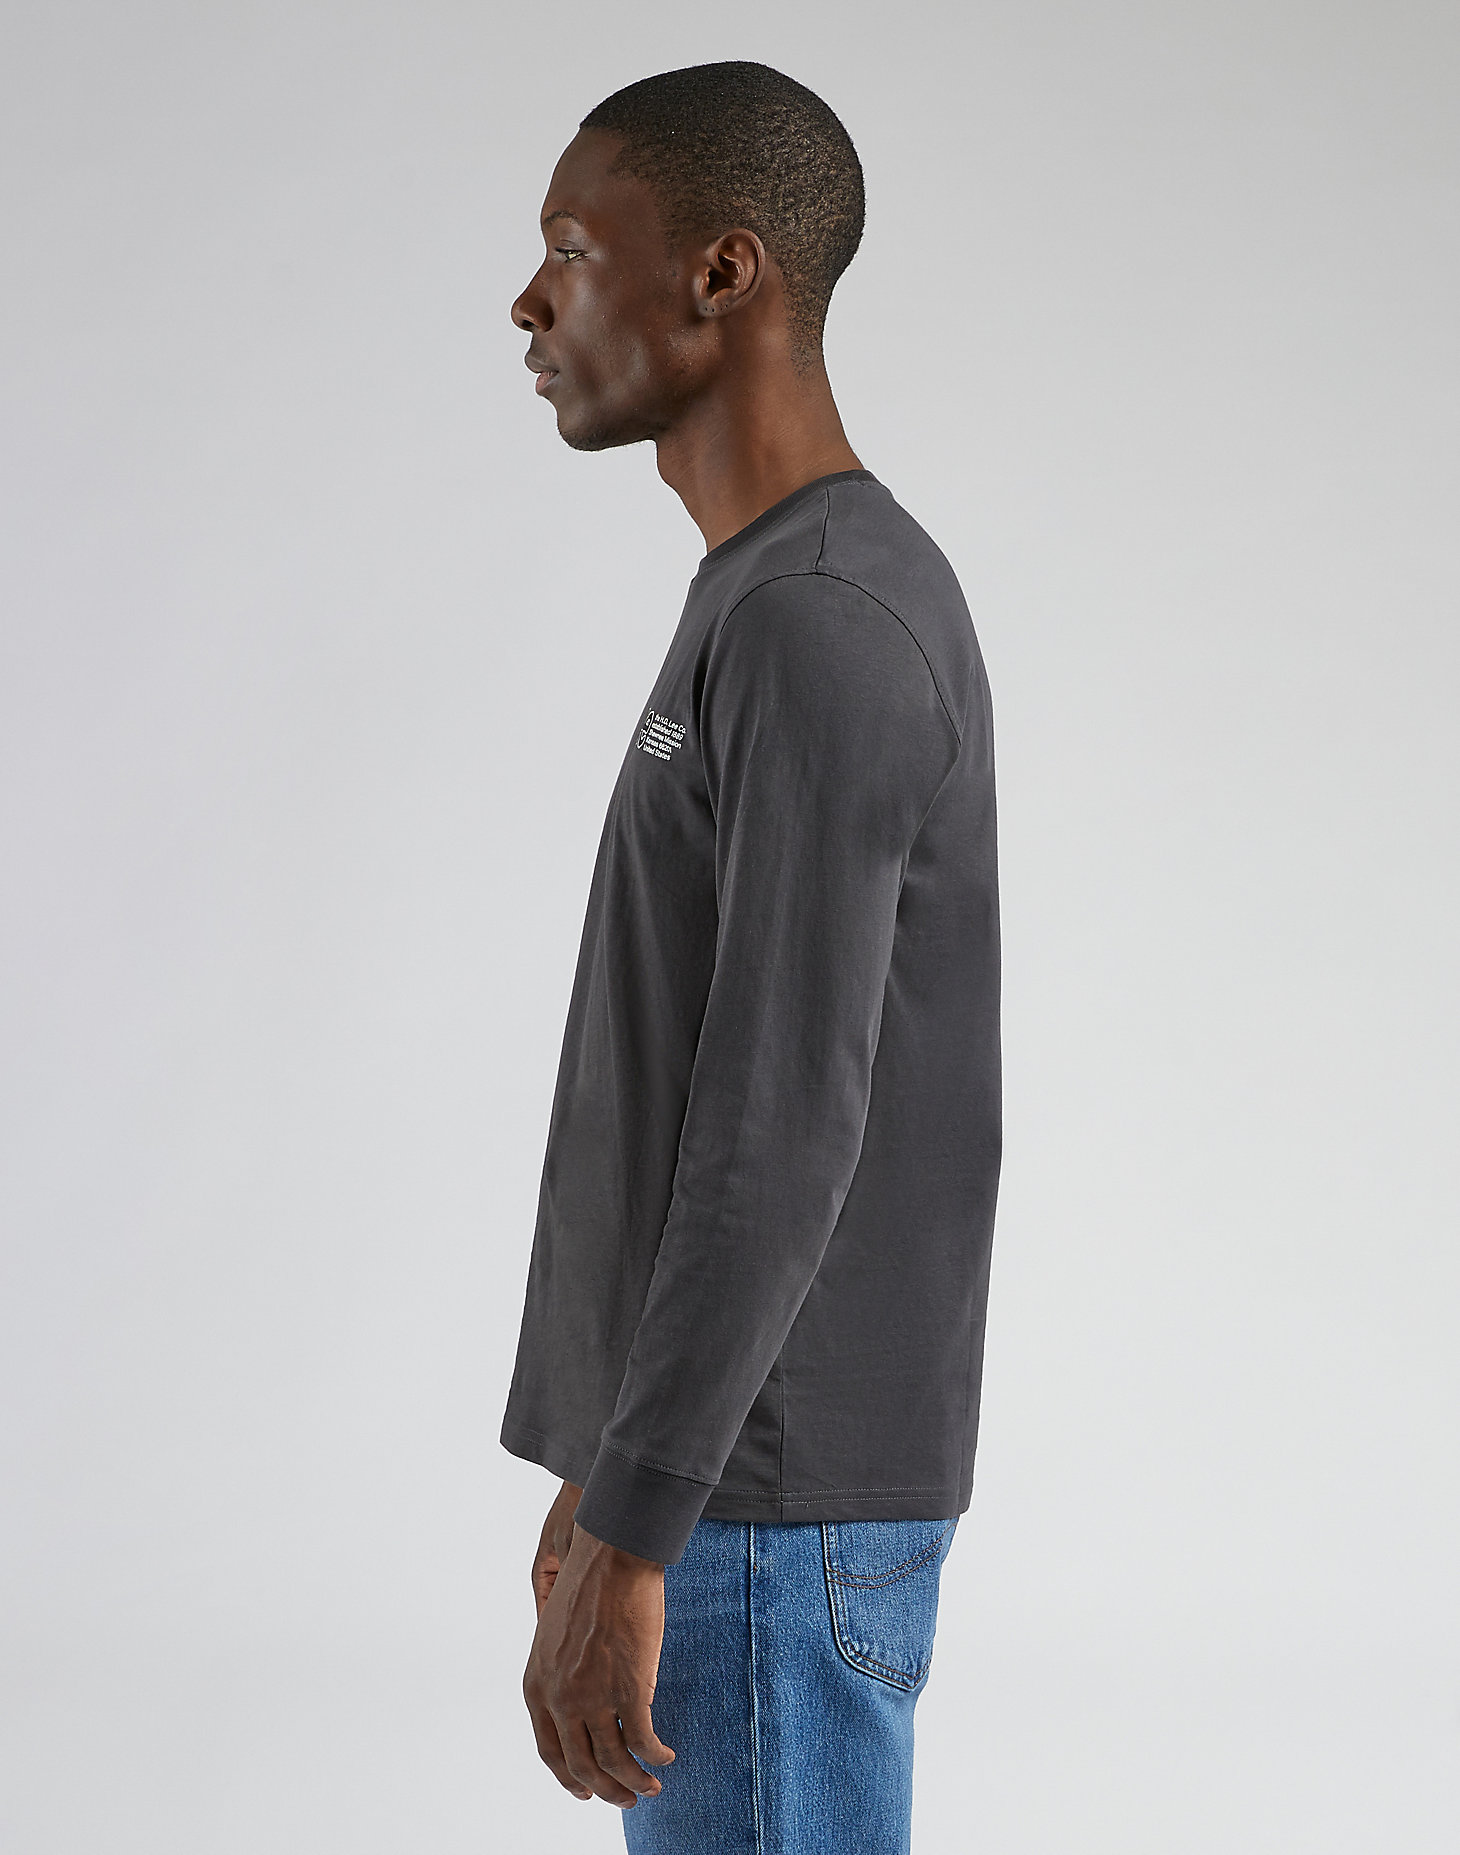 Long Sleeve Logo Tee in Washed Black alternative view 3